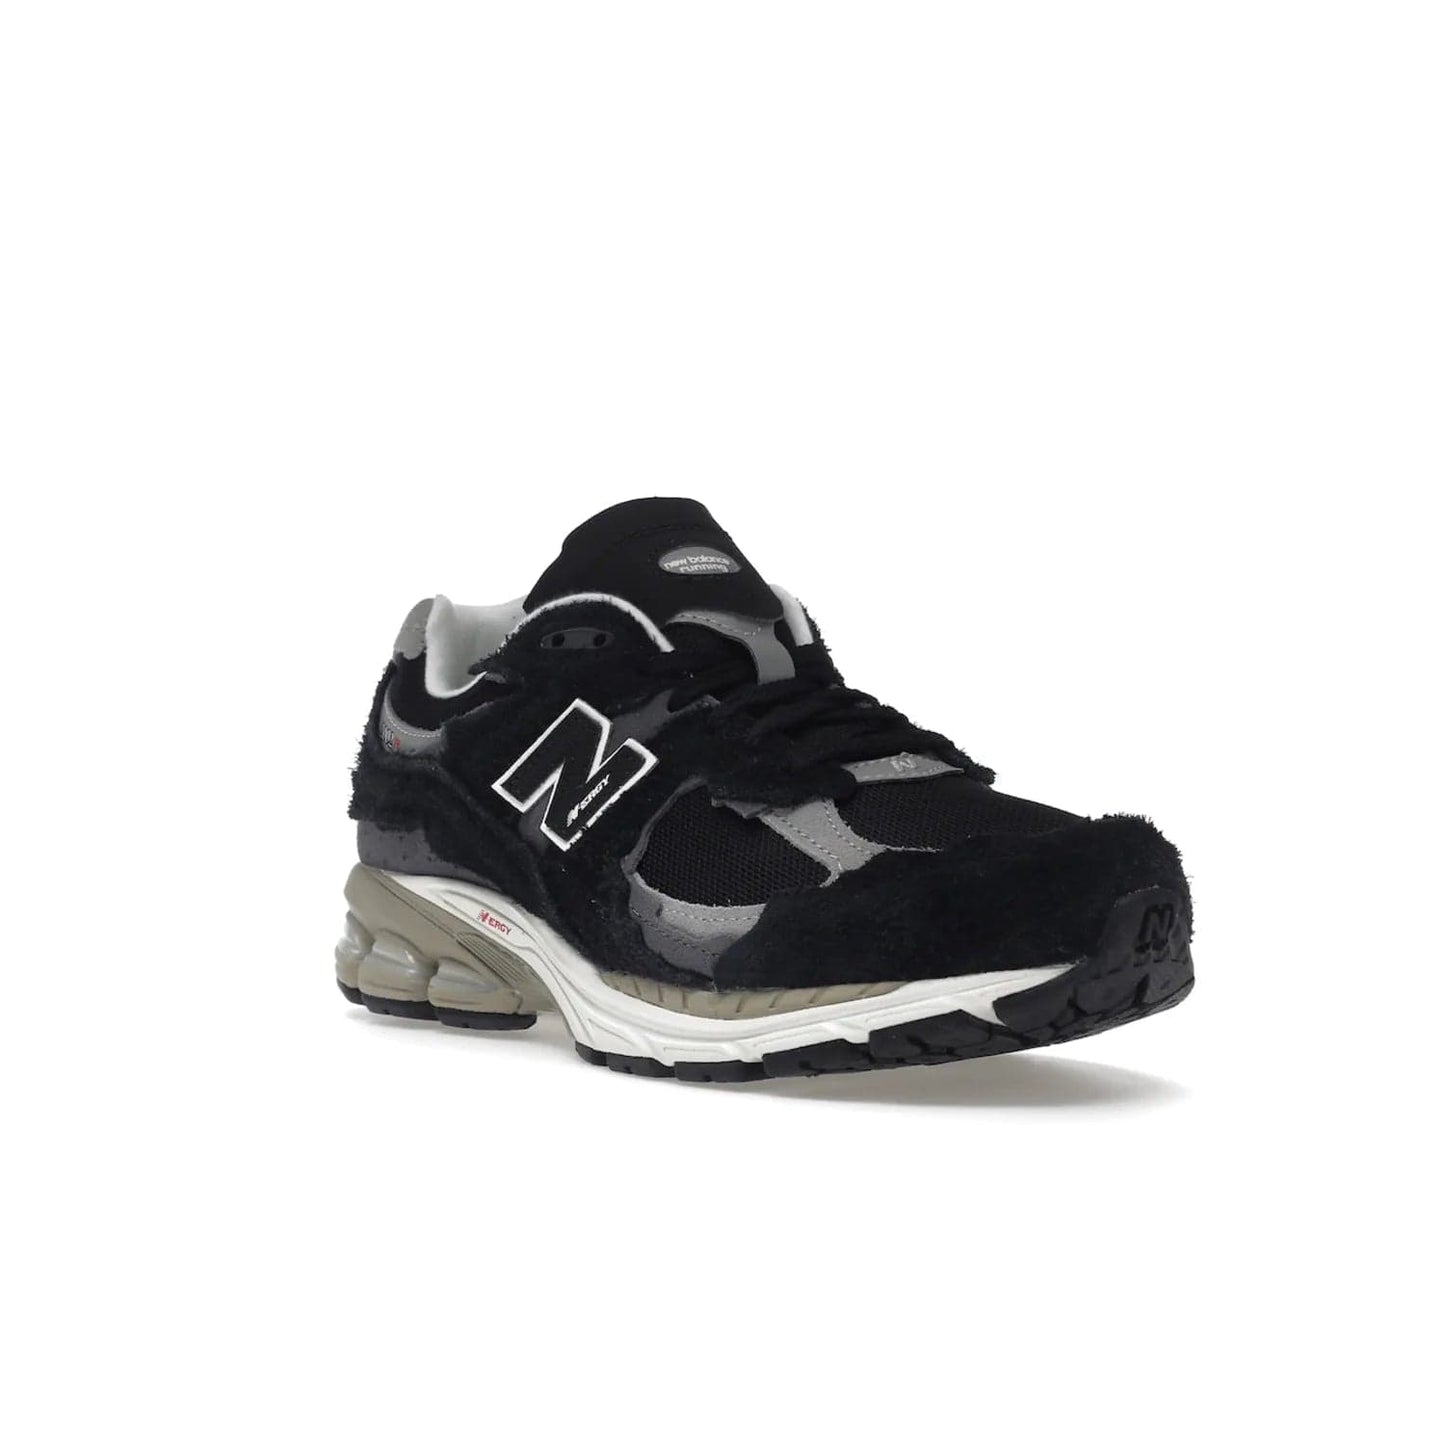 New Balance 2002R Protection Pack Black Grey - Image 6 - Only at www.BallersClubKickz.com - Look stylish in the New Balance 2002R Protection Pack Black Grey. Uppers constructed from premium materials like mesh and synthetic overlays. Iconic "N" emblem appears in white and black. ABZORB midsole for shock absorption and responsiveness. Black outsole for grip and traction. Lacing system offers customized fit and cushioned tongue and collar offer comfort and stability. Step up your style with this must-have